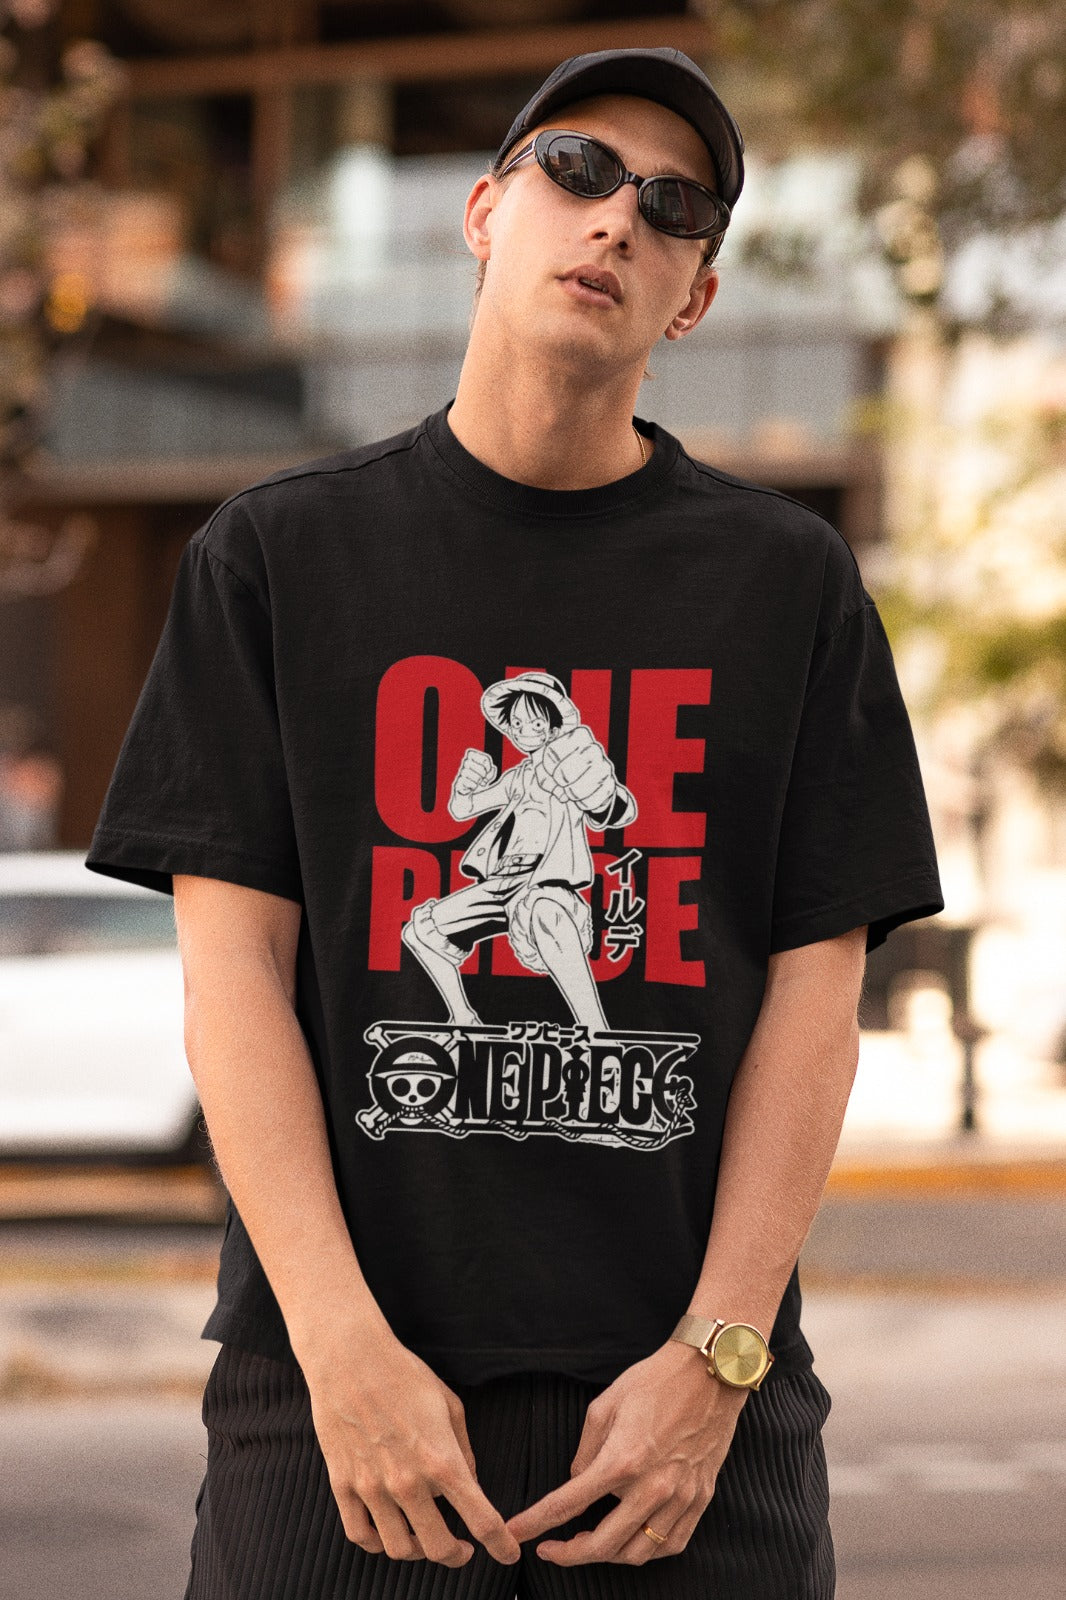 Embrace the spirit of adventure with our black unisex oversized t-shirt featuring bold "One Piece" written in red, as Luffy strikes a fierce fighting pose. Crafted for comfort and style, this dynamic tee is a must-have for One Piece fans. Channel your inner pirate and join Luffy's epic journey in this unique t-shirt. Set sail for greatness now!